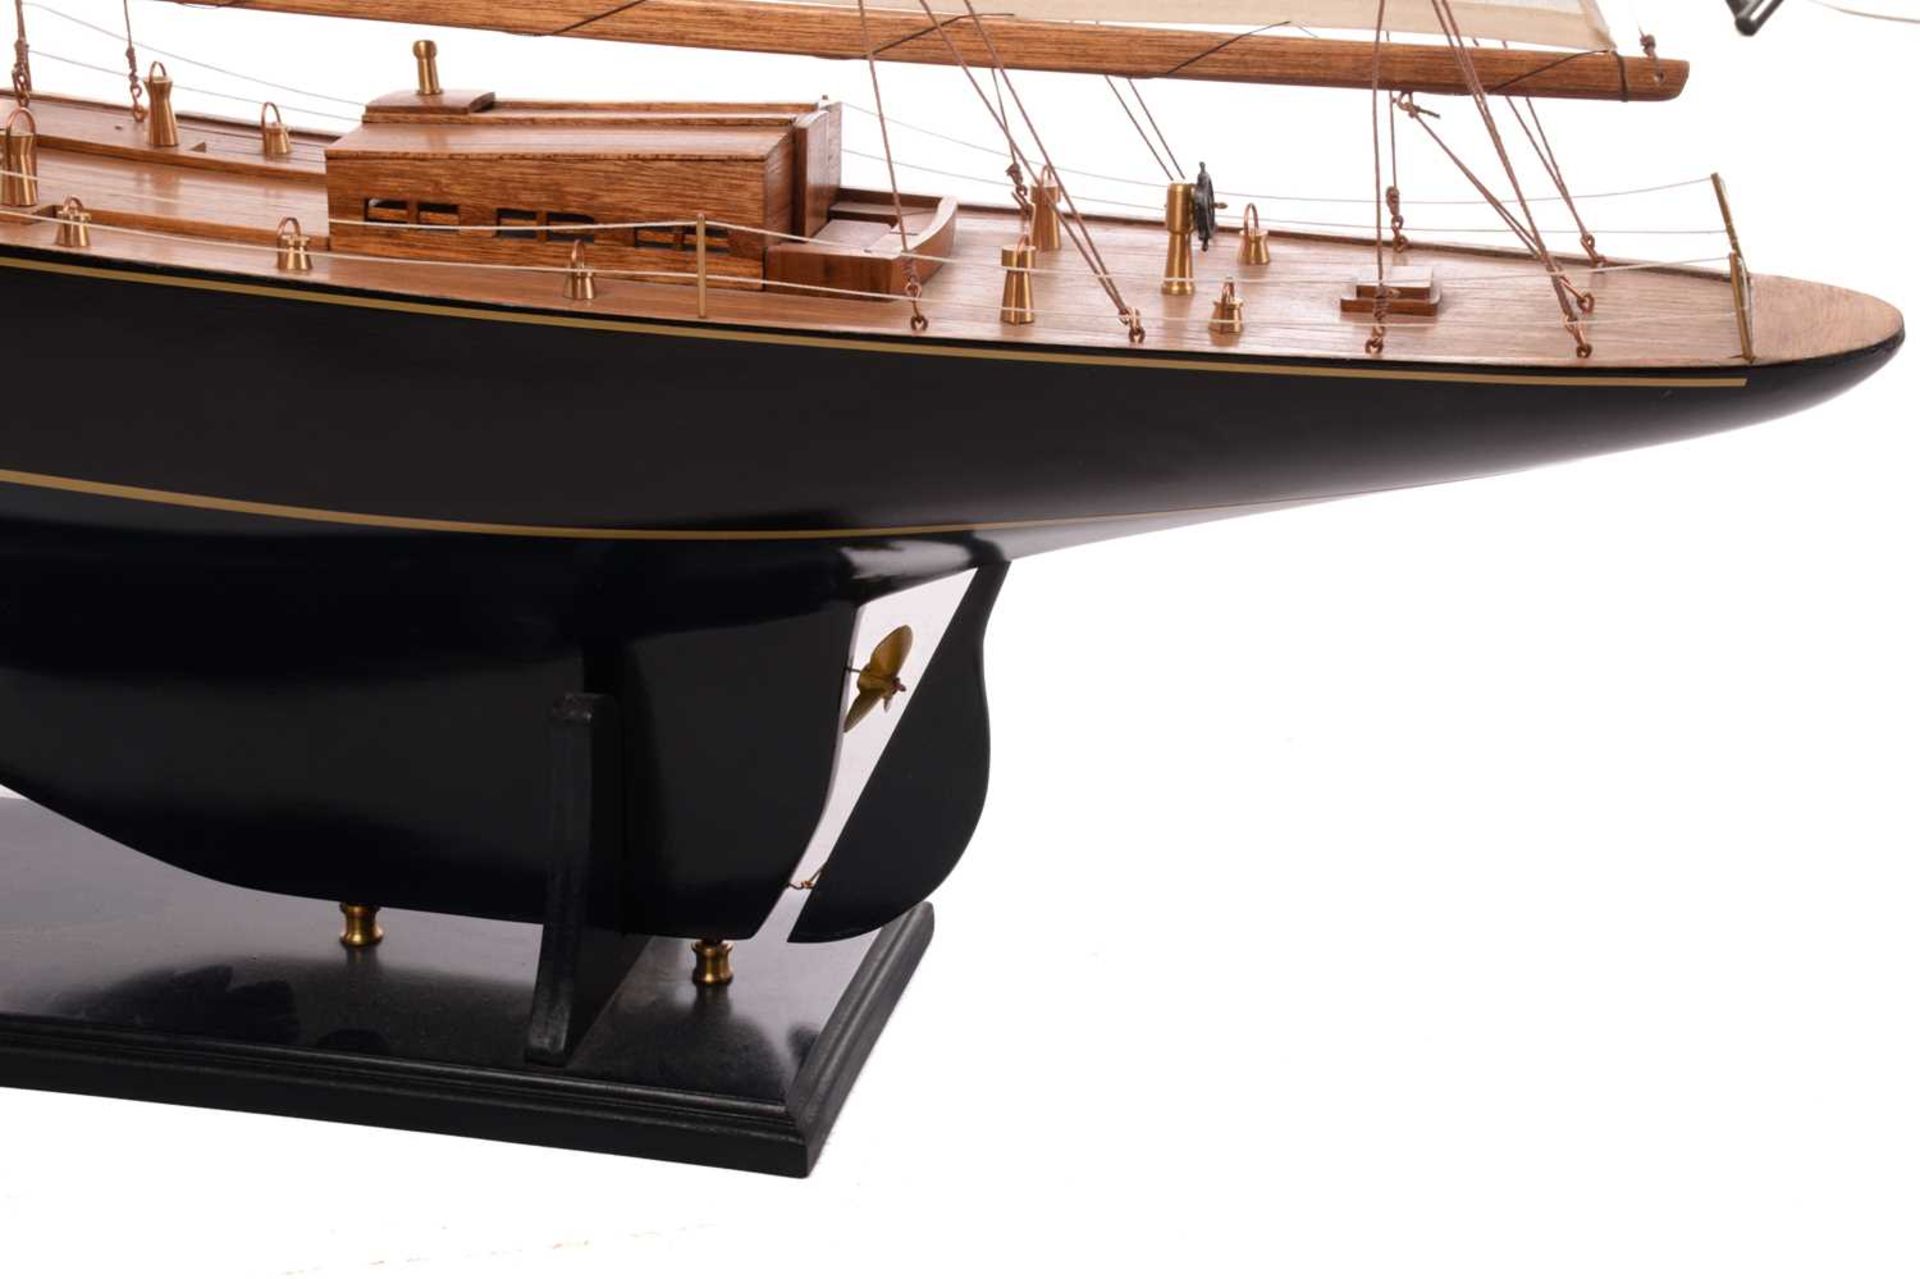 A painted and stained wood model of the yacht 'Endeavour', with fabric sales and rigging on a titled - Image 12 of 16